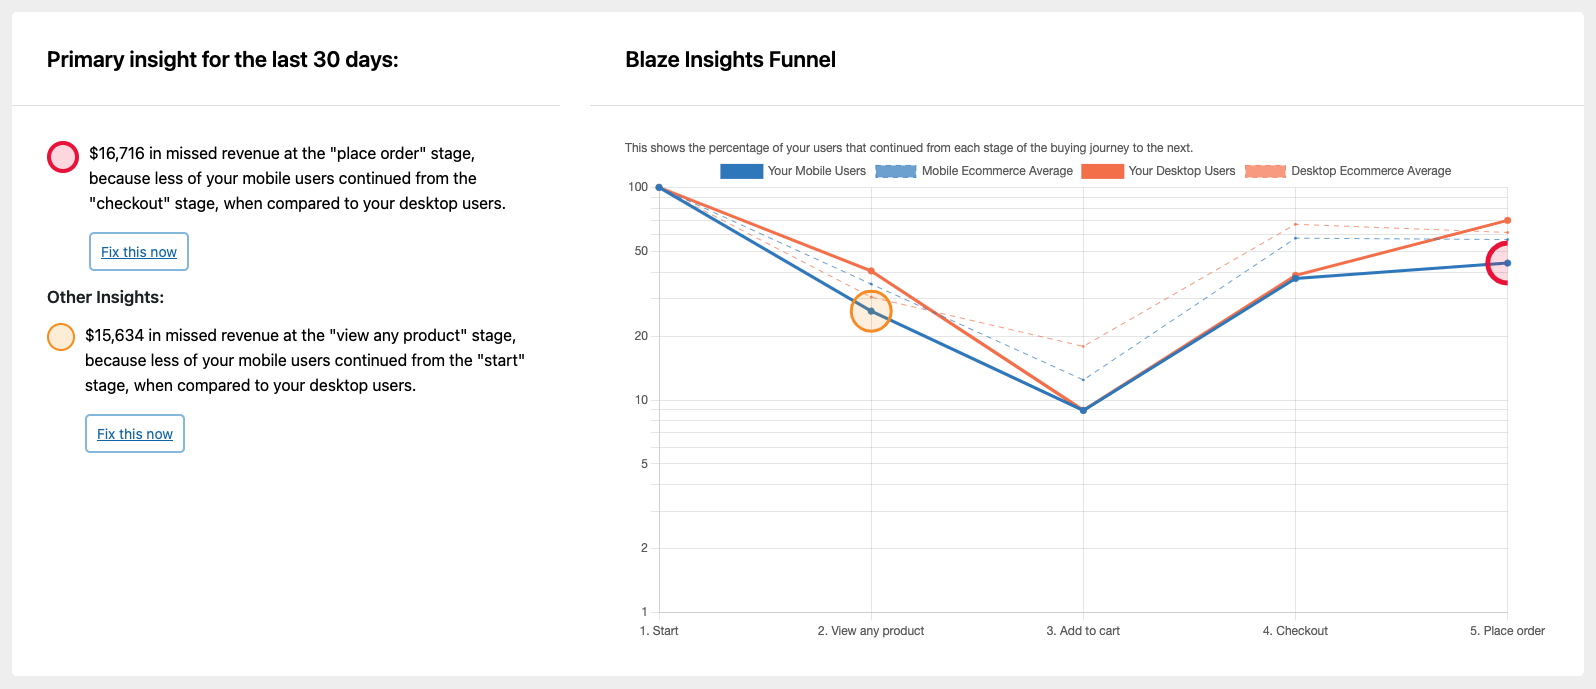 Relative funnel: This shows the percentage of your users that continued from each stage of the buying journey to the next.